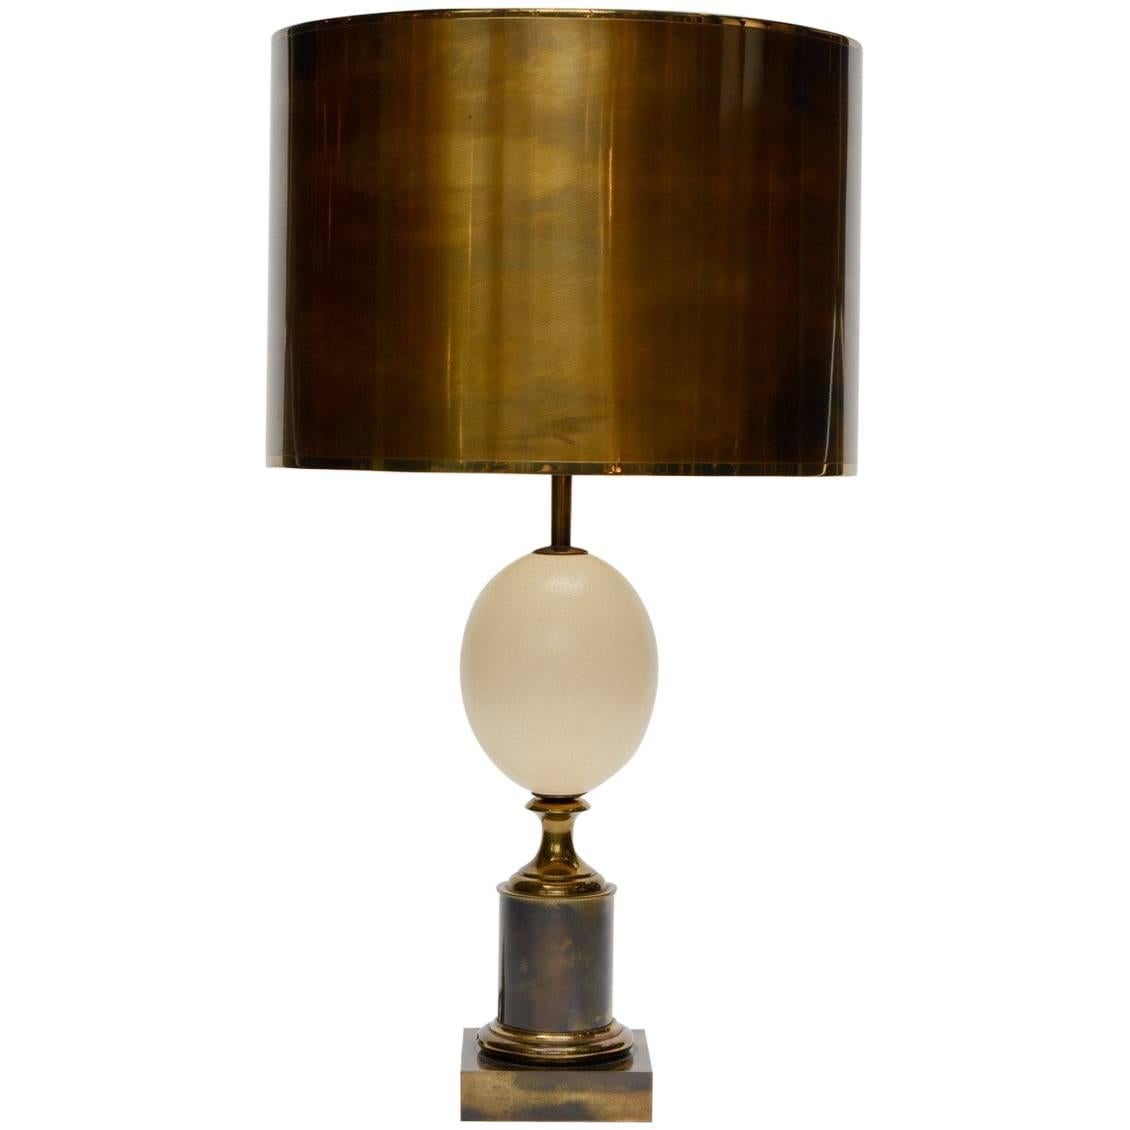 Maison Charles Patinated Brass and Ostrich Egg Table Lamp